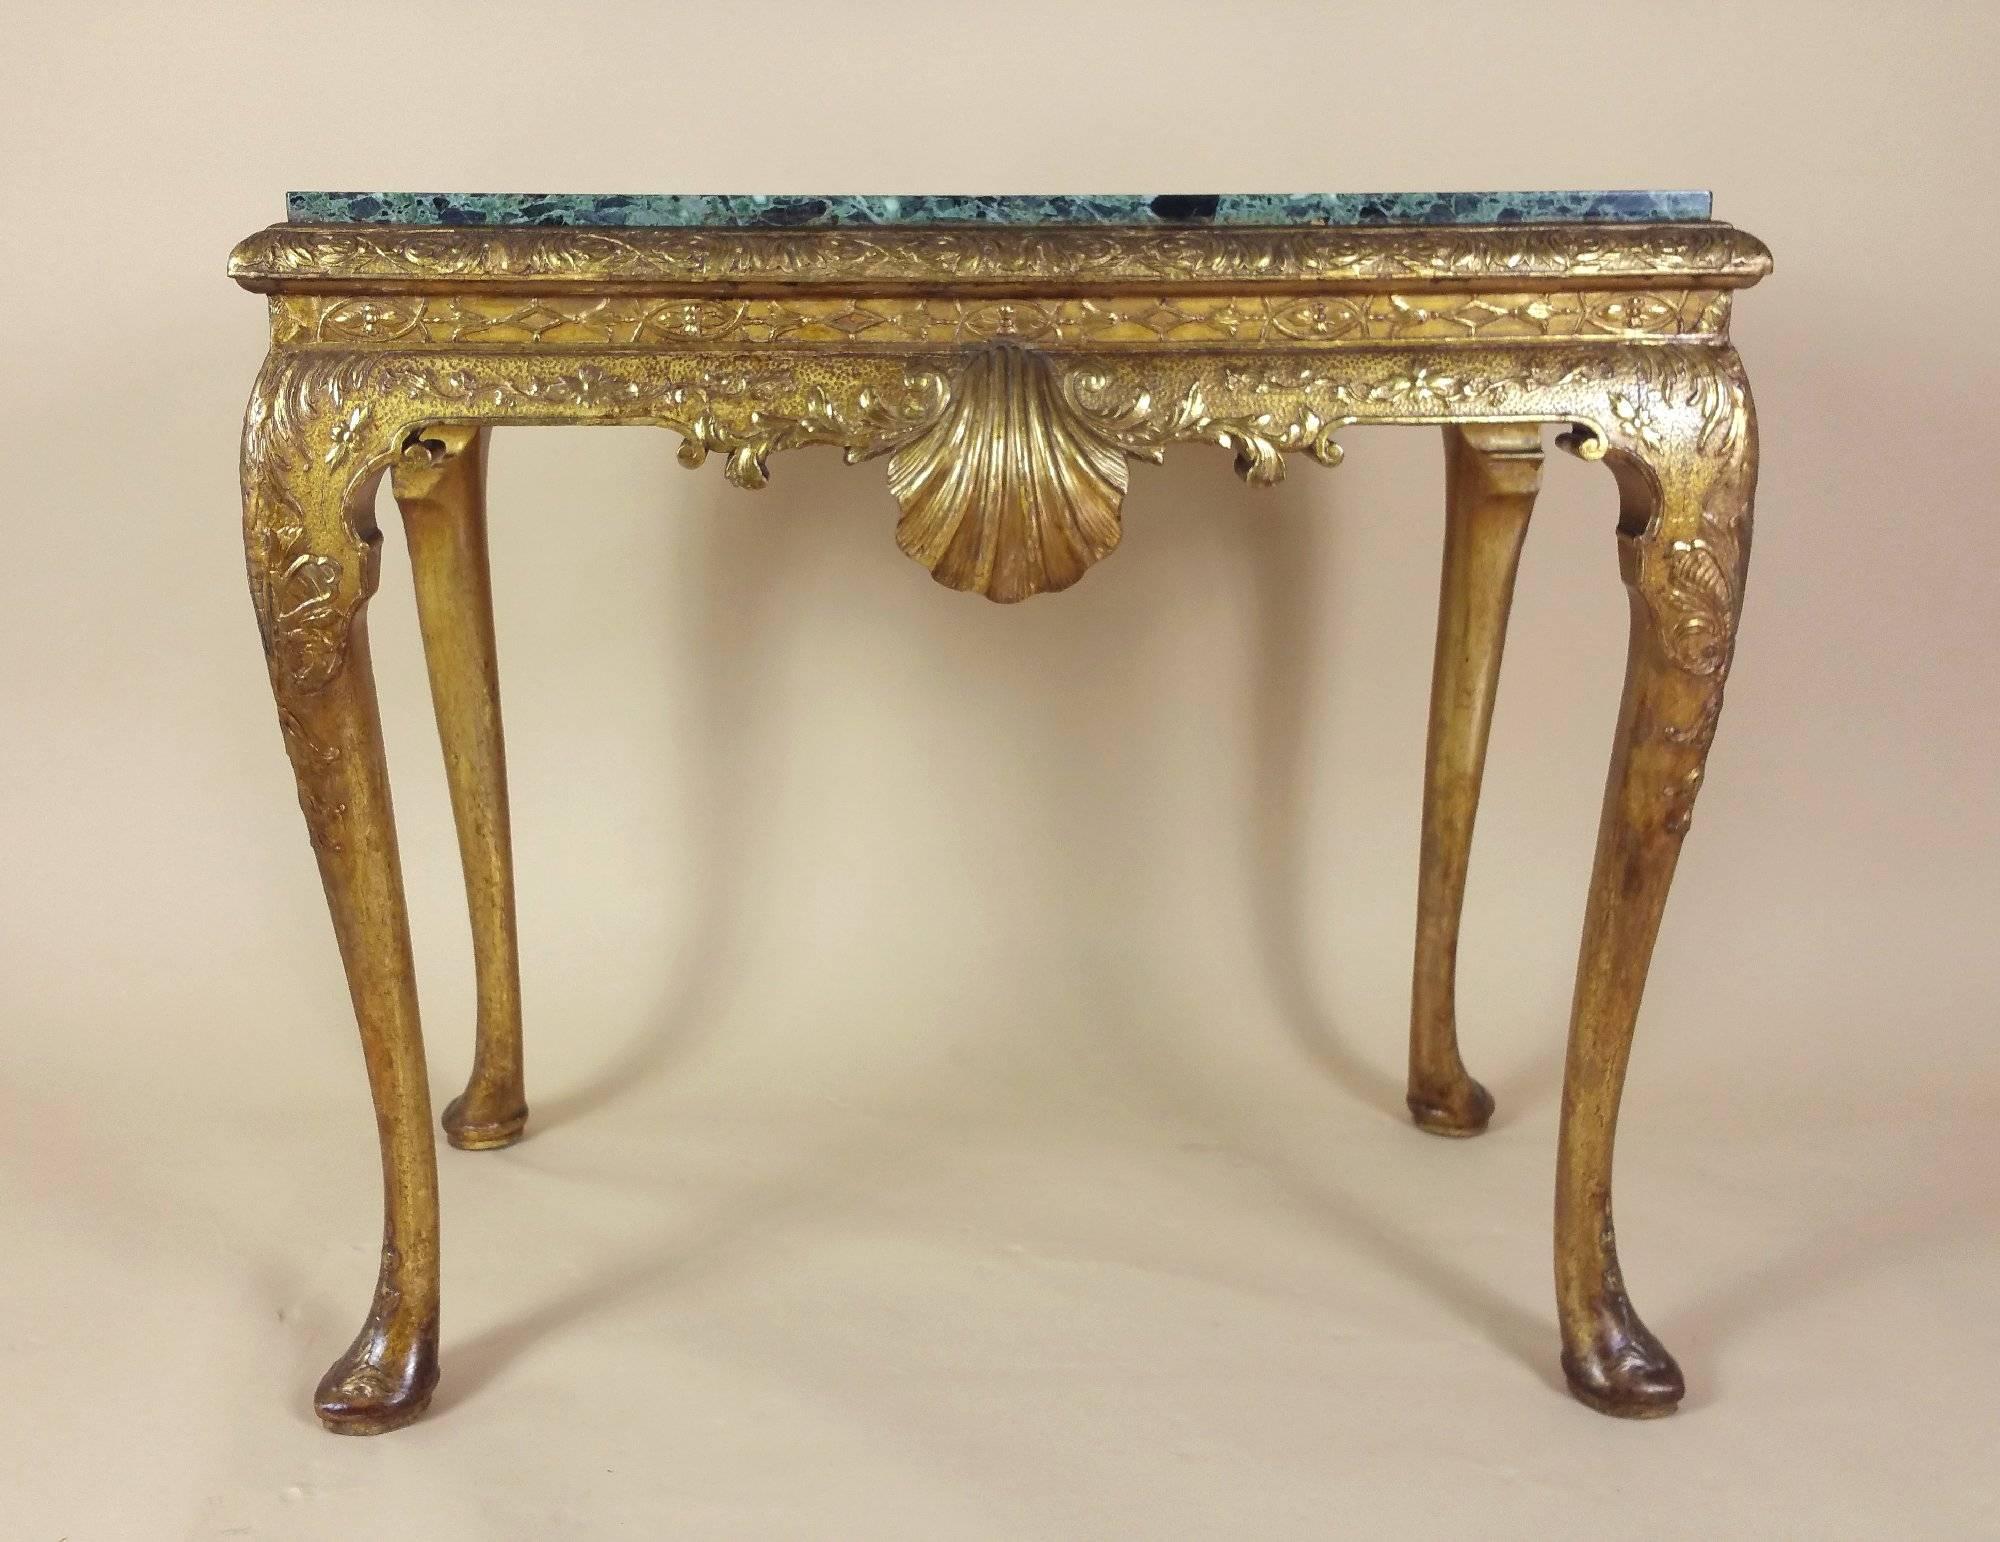 This stunning and very attractive carved giltwood and gesso pier table is designed the George I style, with a lovely green marble top. The table stands on cabriole legs with pad feet, as well as carved detailing along the front and both sides, with